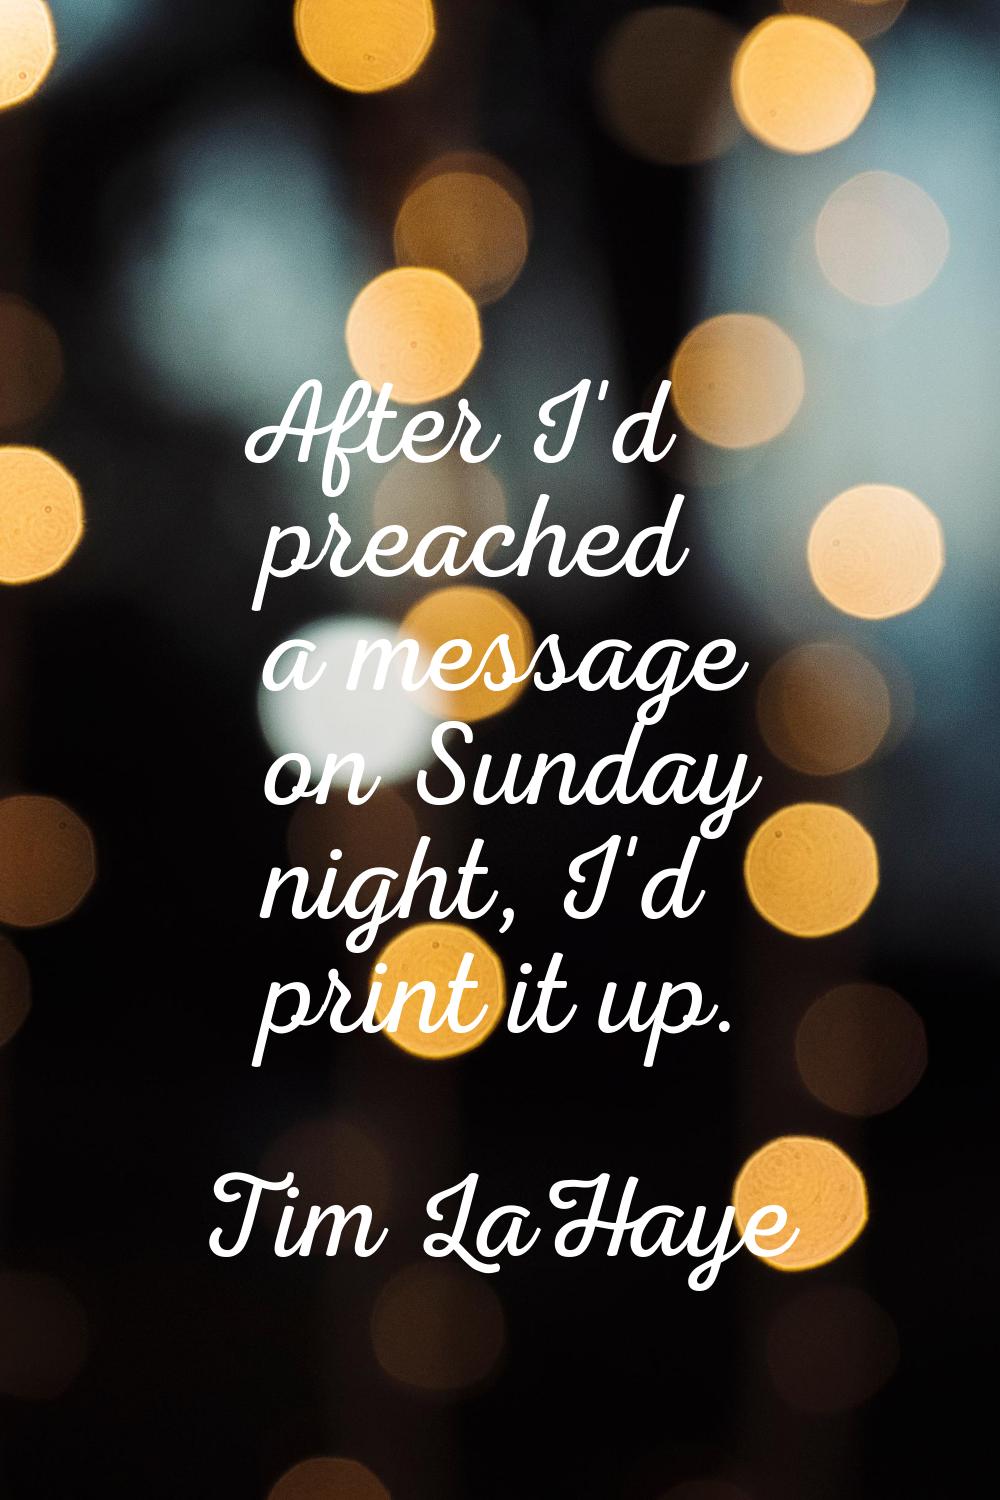 After I'd preached a message on Sunday night, I'd print it up.